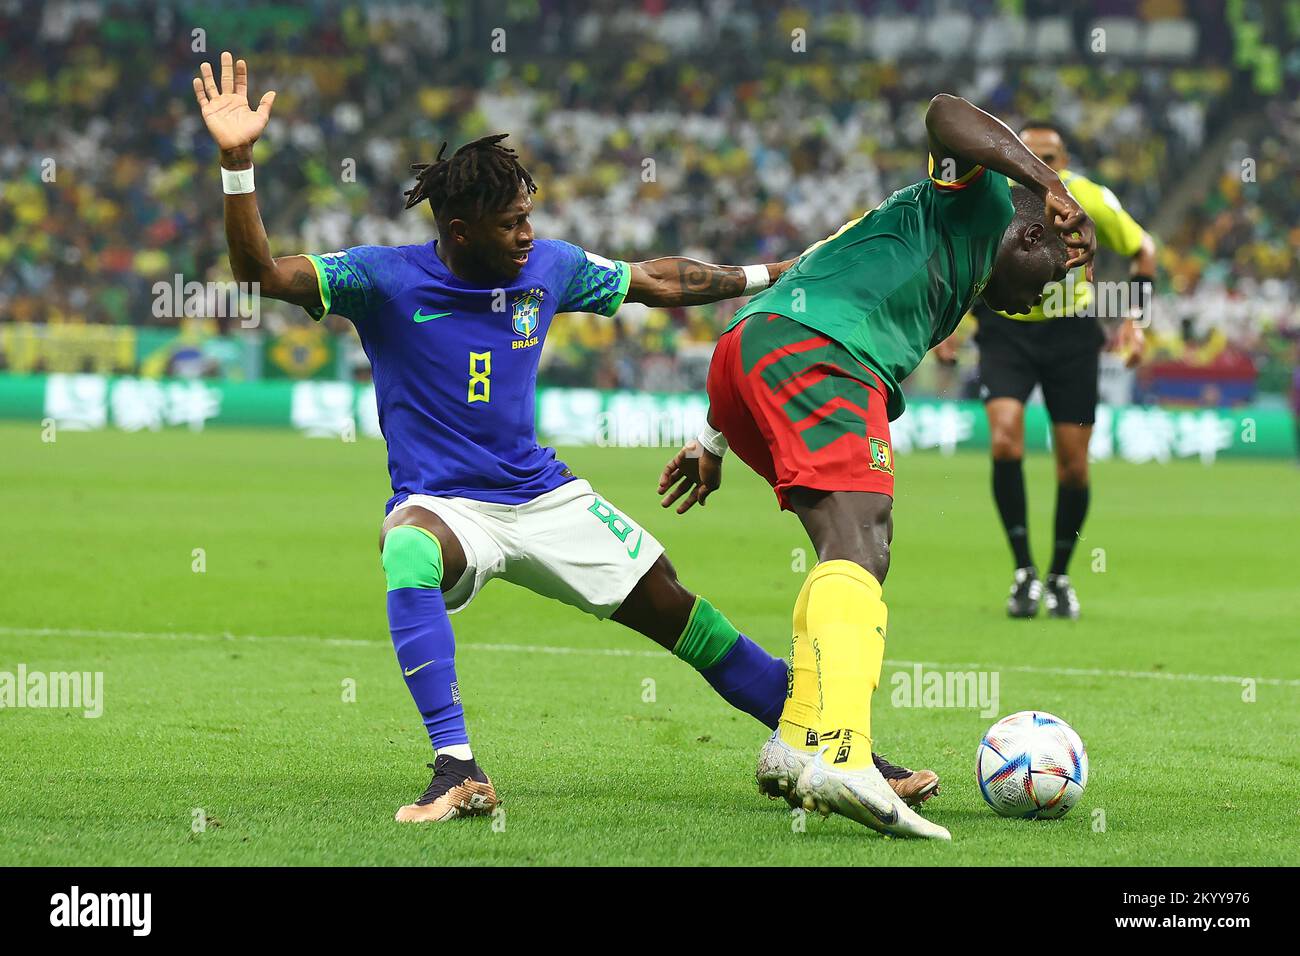 Doha, Qatar. 02nd Dec, 2022. Vincent Aboubakar (R) of Cameroon in action with Fred of Brazil during the 2022 FIFA World Cup Group G match at Lusail Stadium in Doha, Qatar on December 02, 2022. Photo by Chris Brunskill/UPI Credit: UPI/Alamy Live News Stock Photo